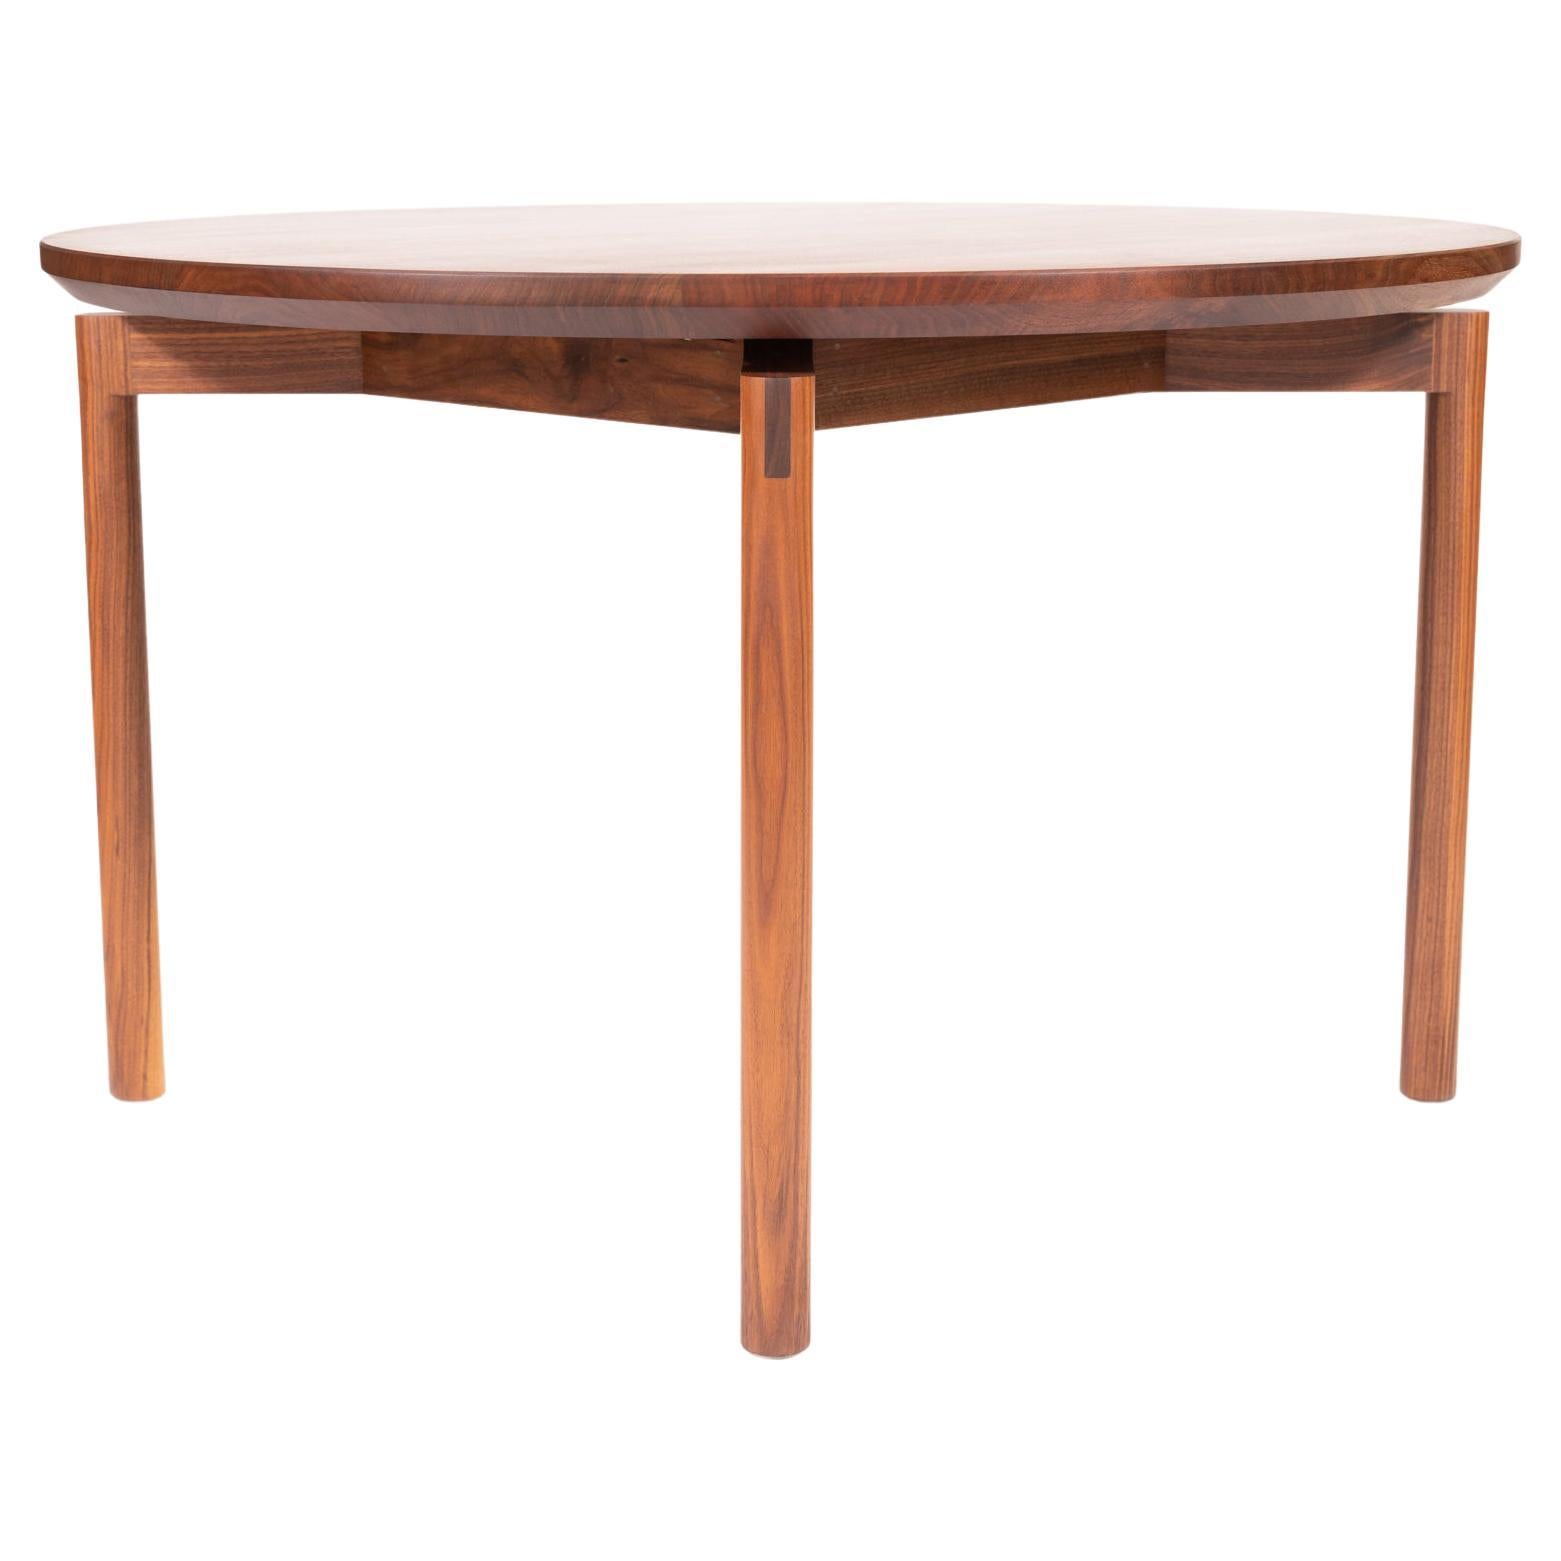 Enso Table, Walnut Dining Table with Knife-Edge and Exposed Joinery